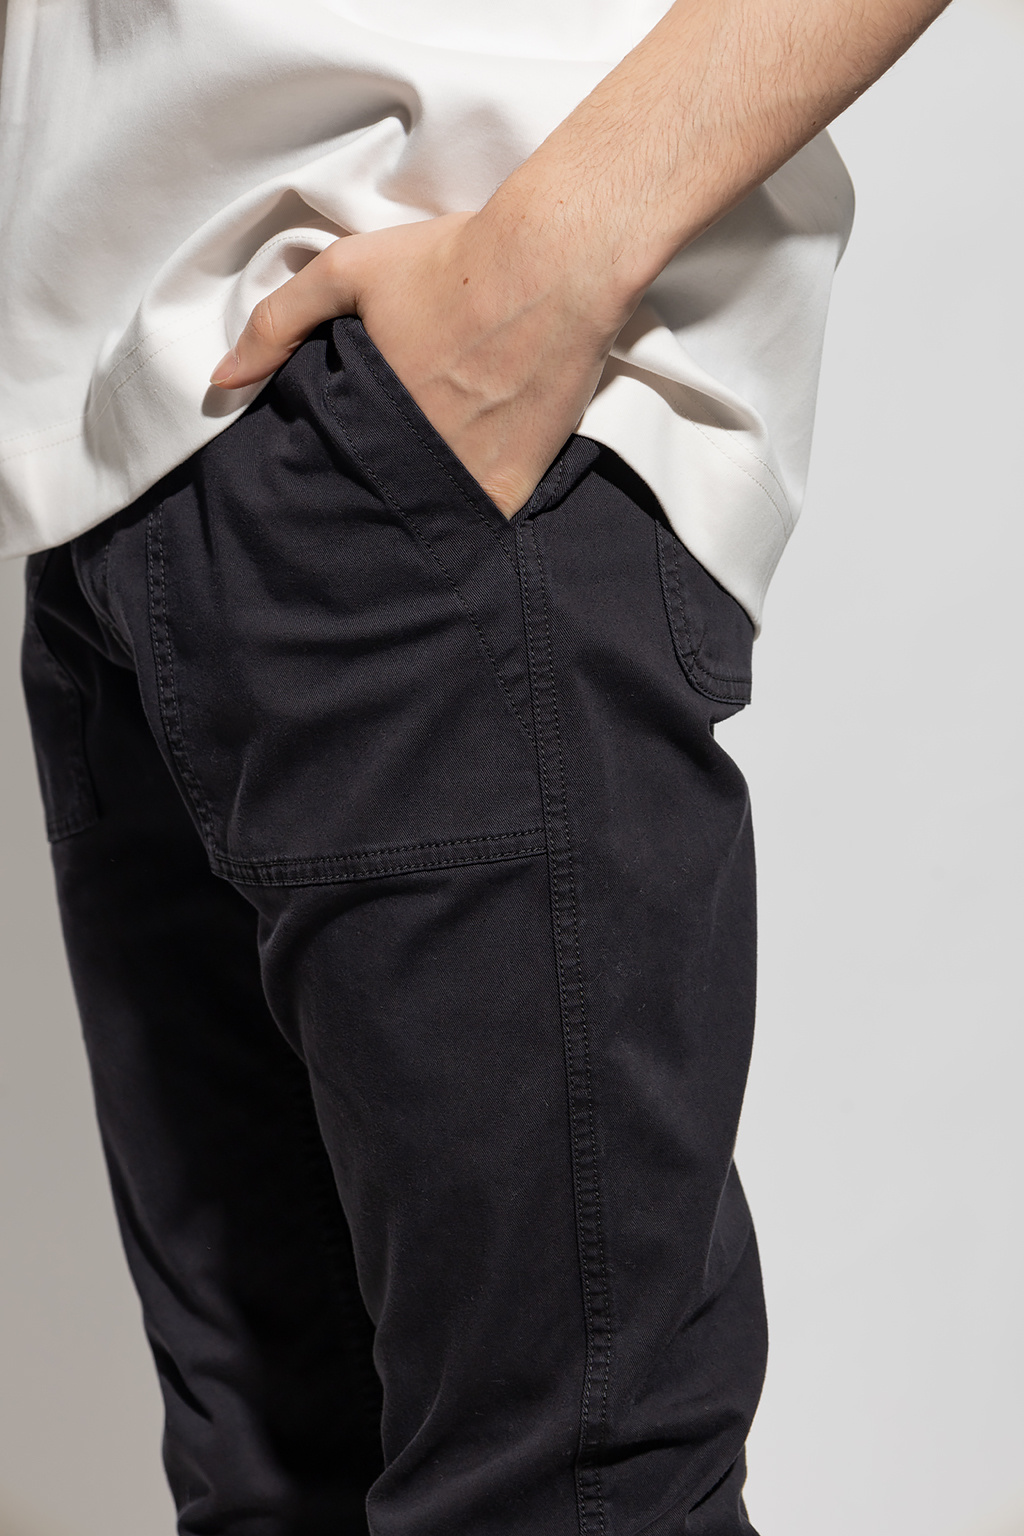 tracksuit style tapered trousers, FENDI